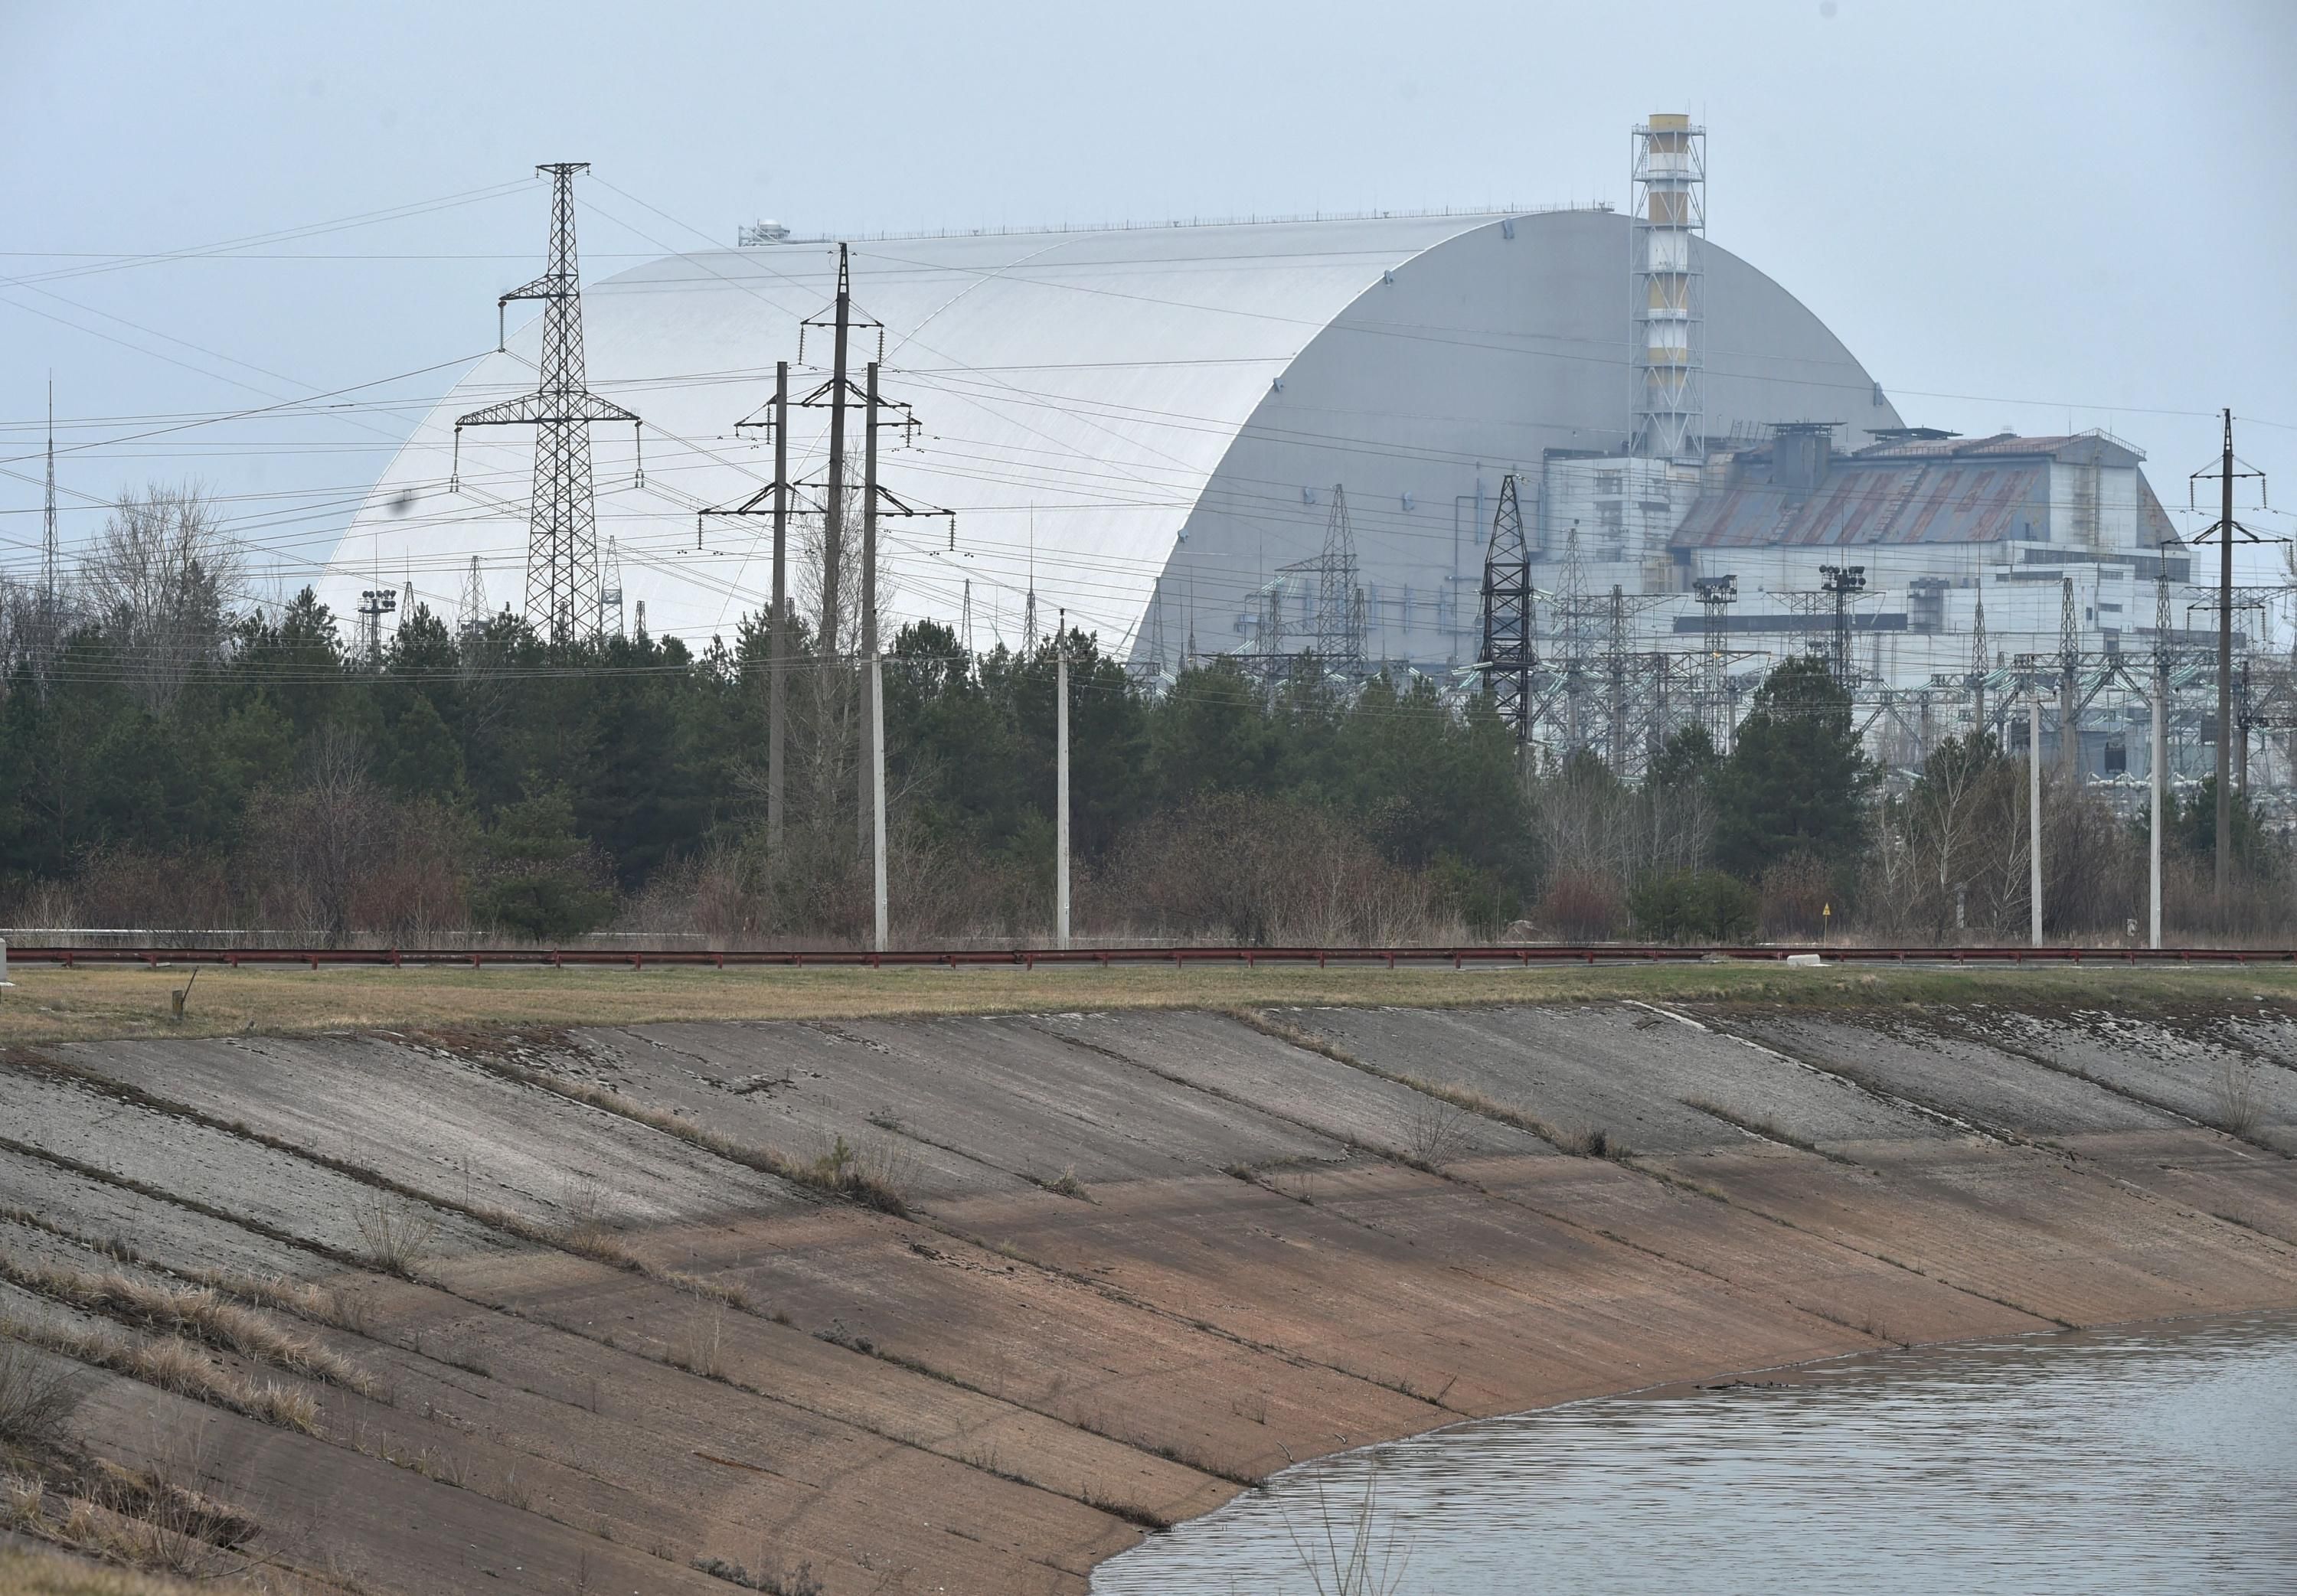 A photo shows the Chernobyl